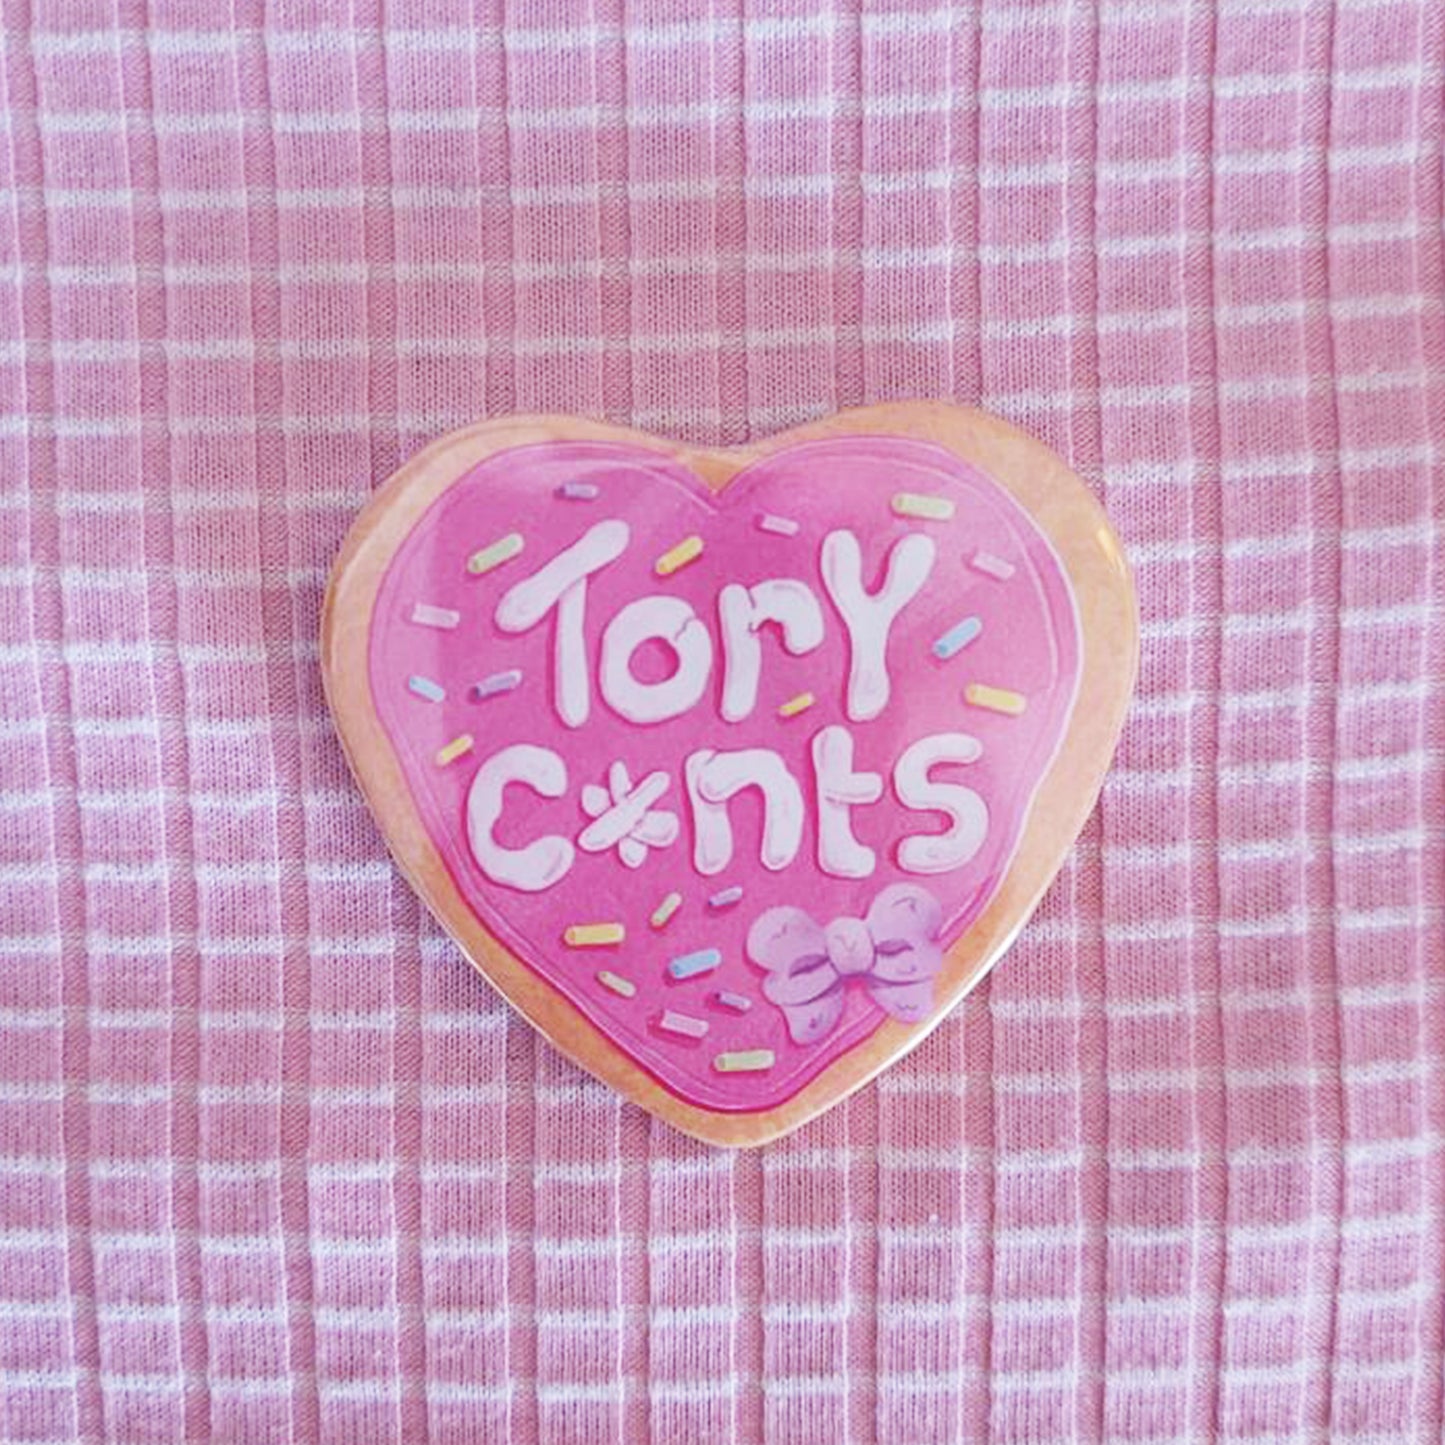 Tory C*nt Sugar Cookie Button Badge